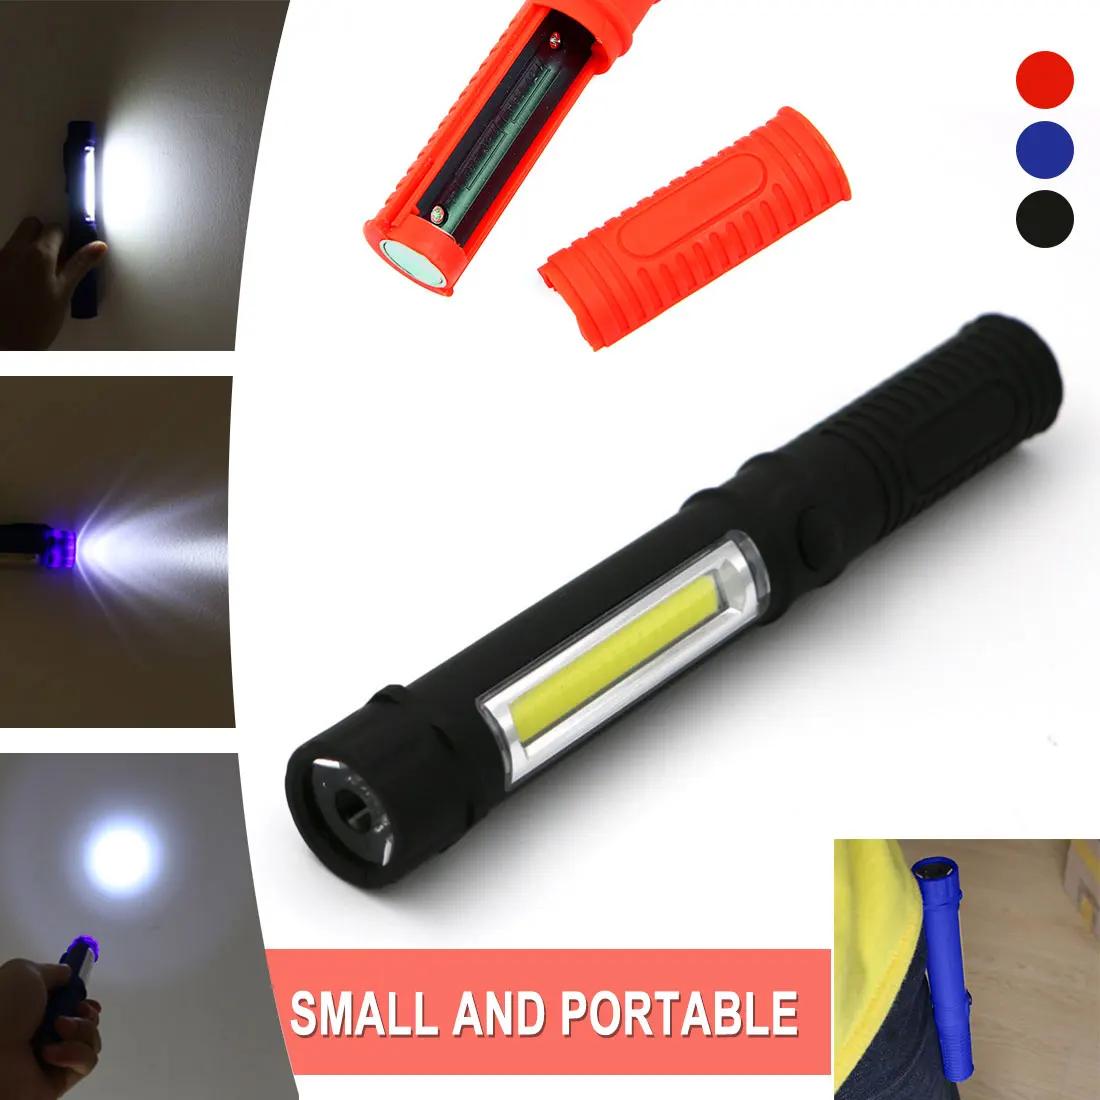 

LED Flashlights COB Mini Pen Light Work Inspection LED Torch Lamp With the Bottom Magnet and Clip Black/Red/Blue Multifunction